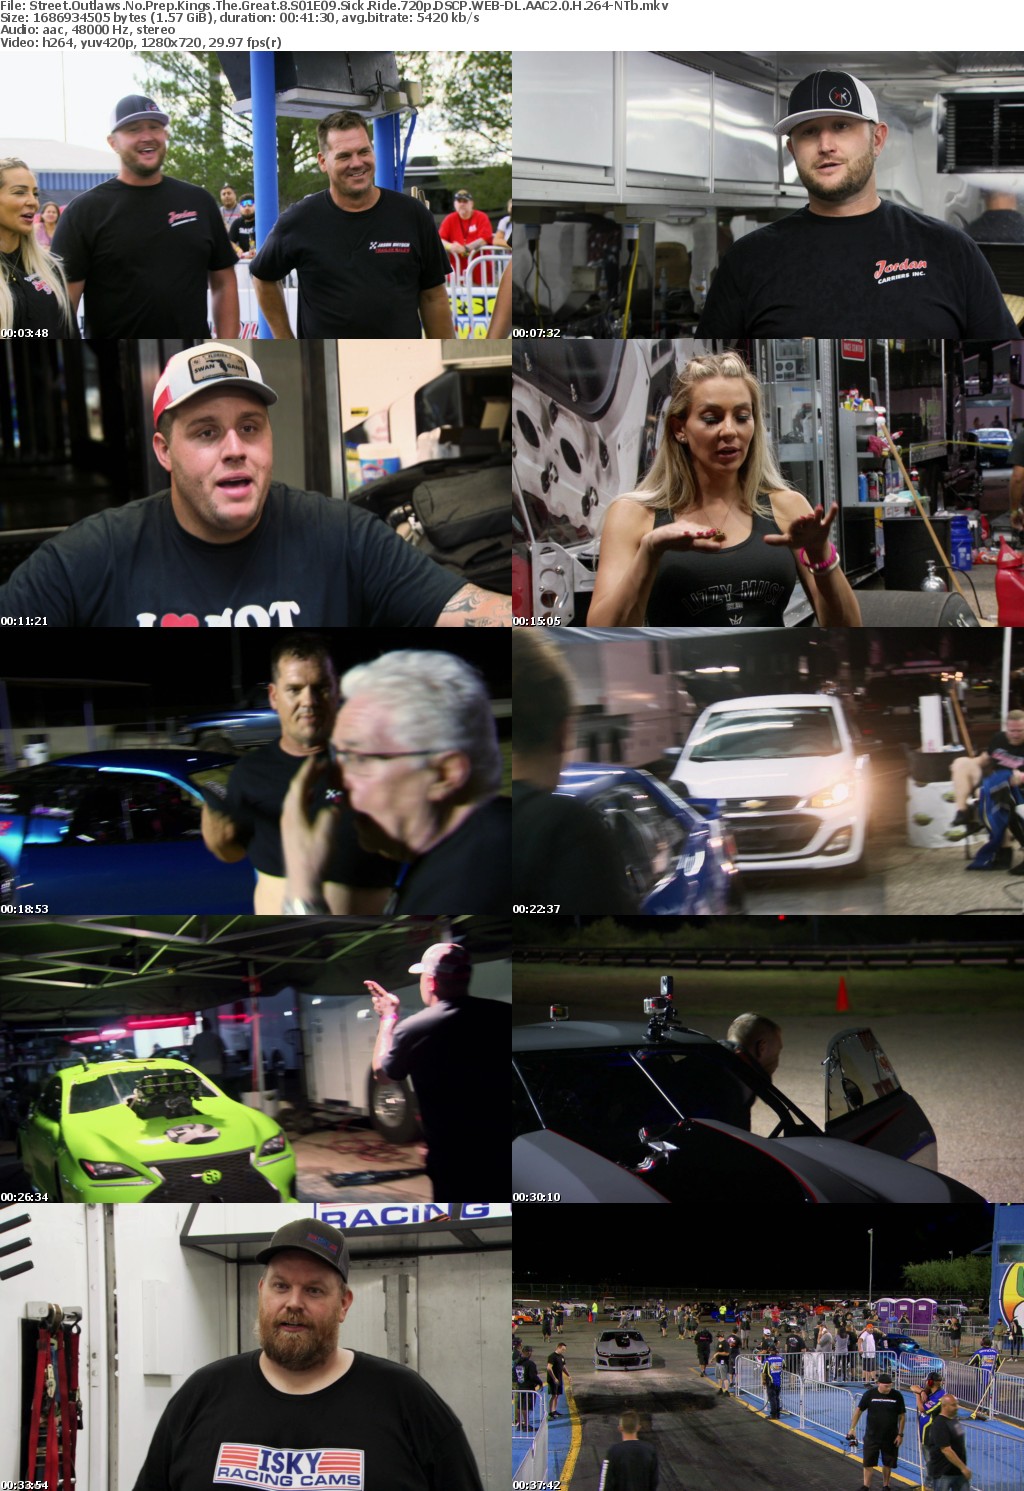 Street Outlaws No Prep Kings The Great 8 S01E09 Sick Ride 720p DSCP WEB-DL AAC2 0 H 264-NTb